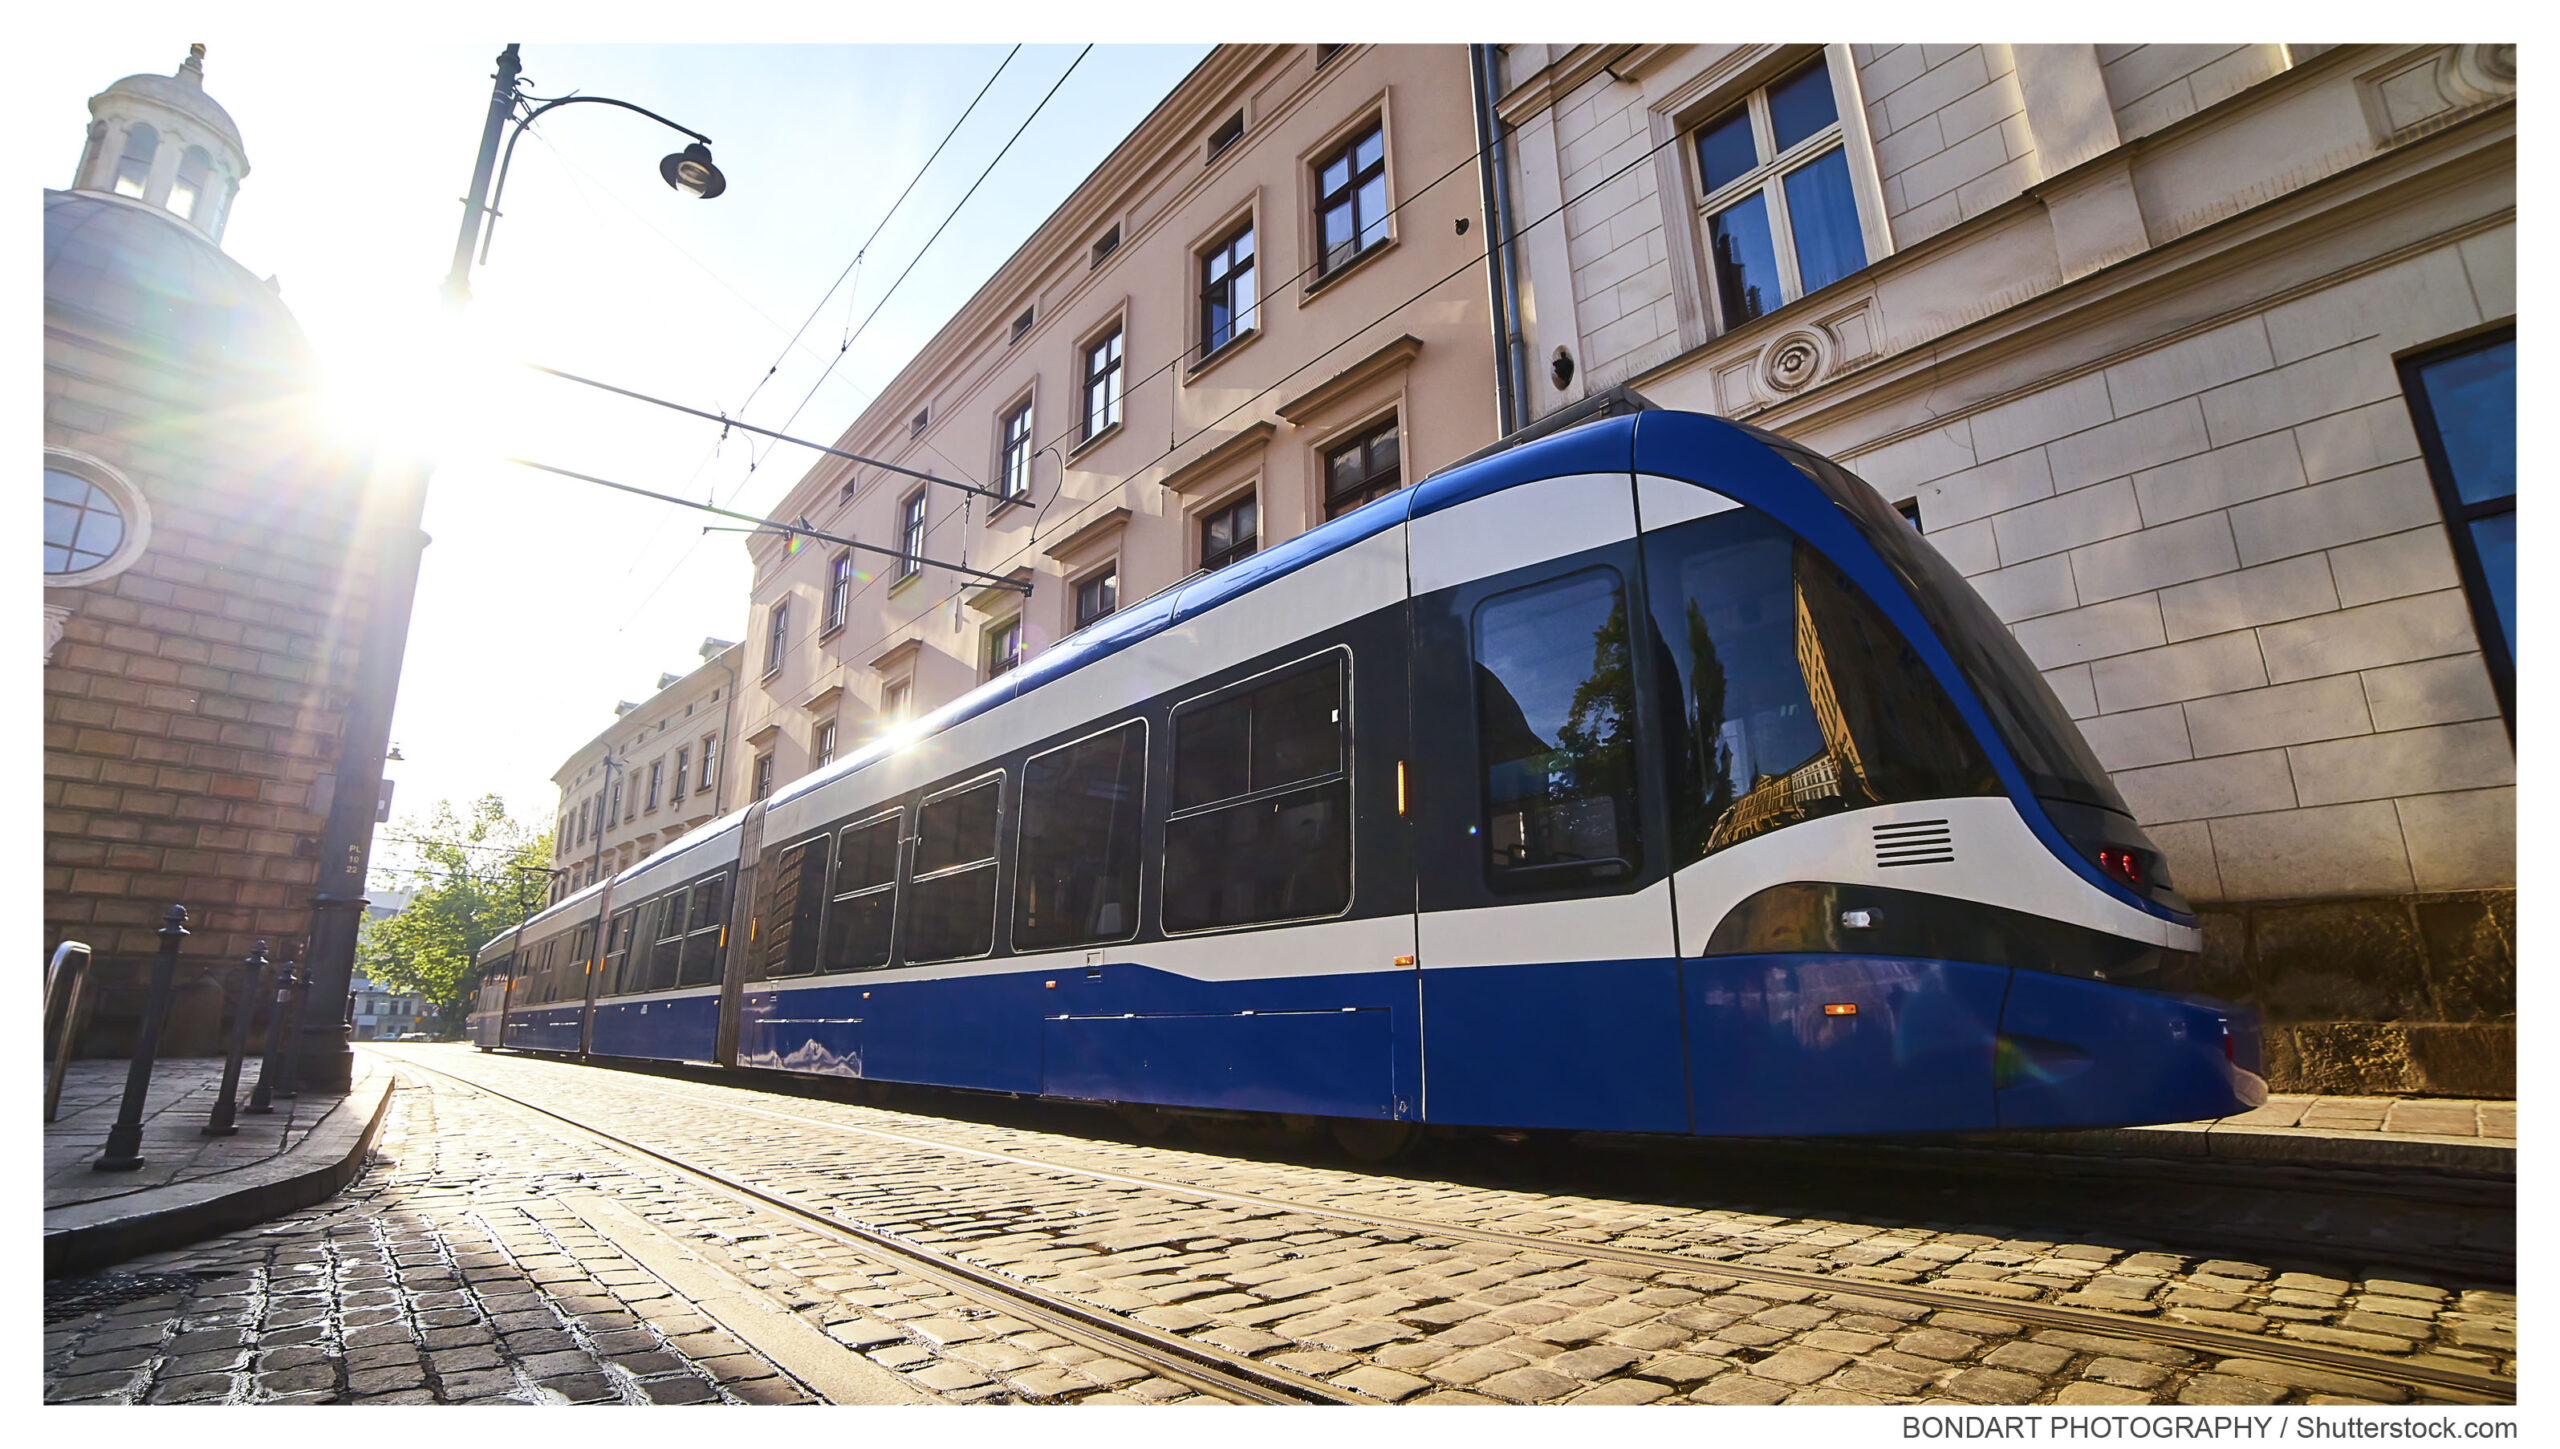 Tram,On,The,Street,Of,Old,Town,In,Krakow,,Poland.